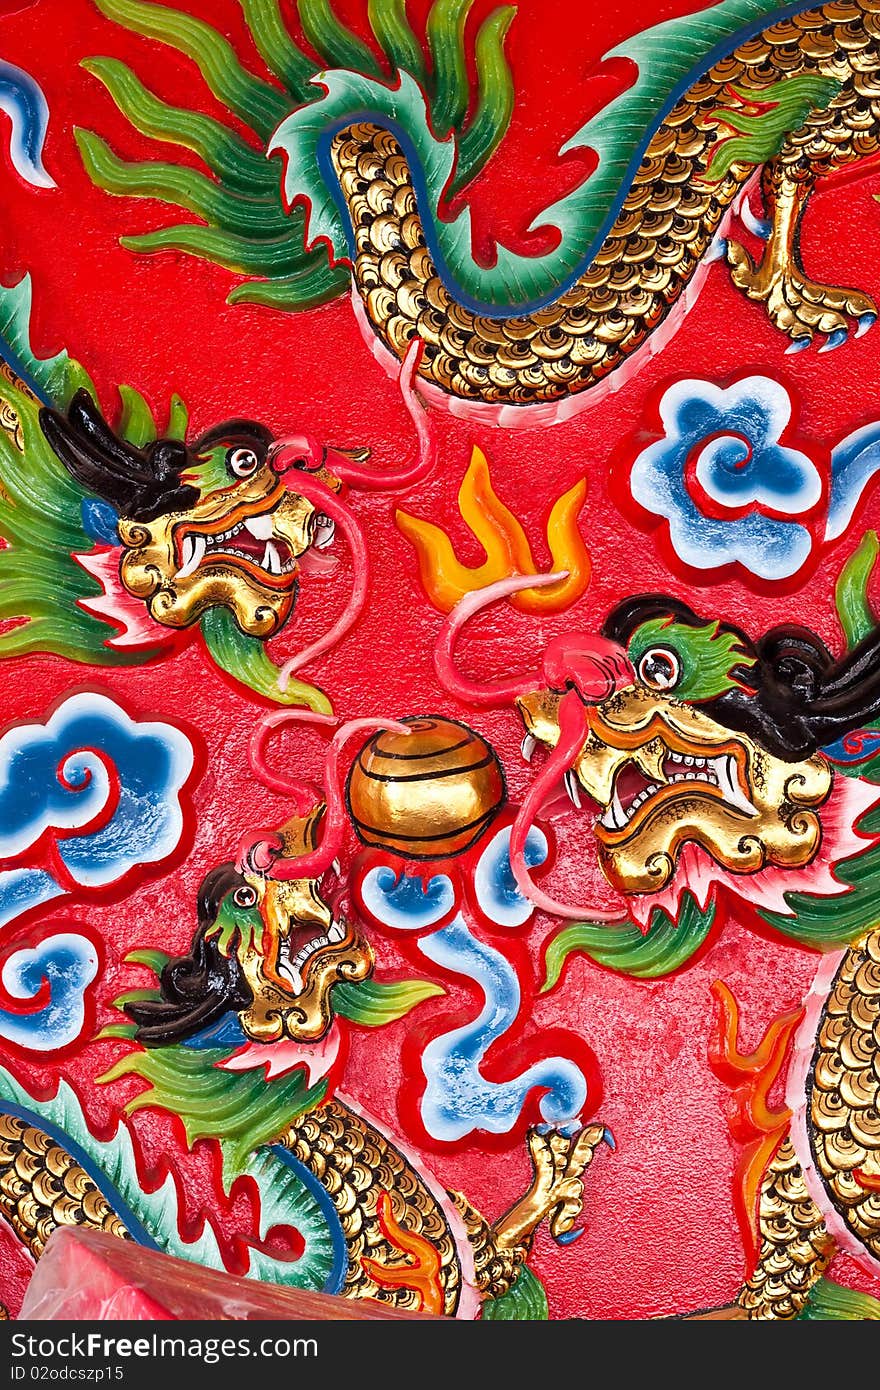 Dargon on the wall in chinese temple